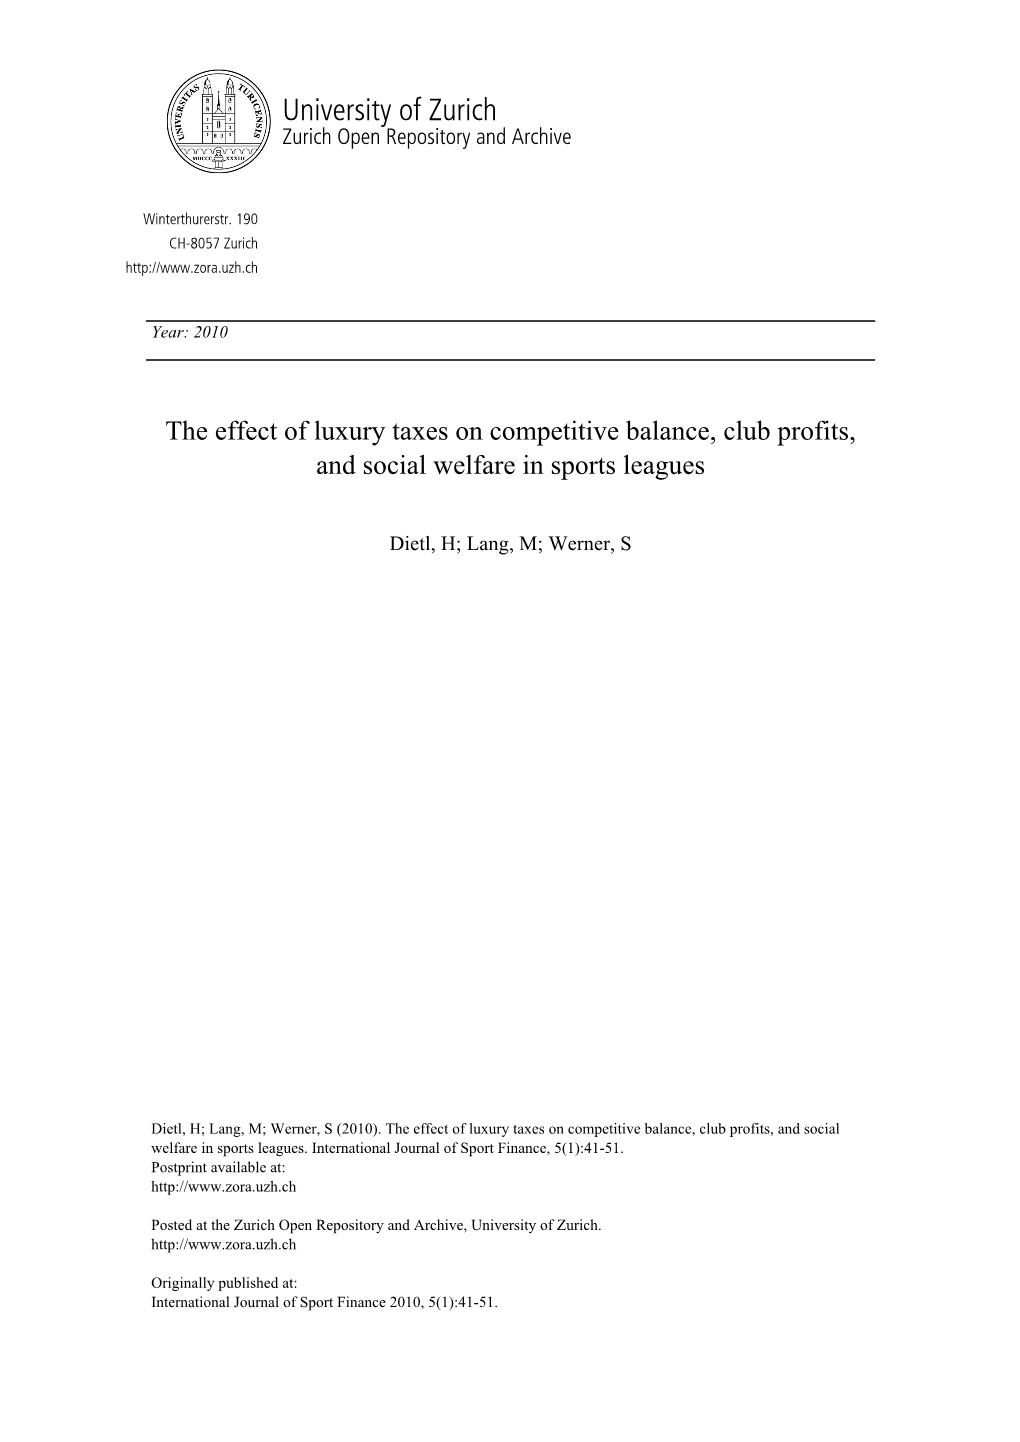 The Effect of Luxury Taxes on Competitive Balance, Club Profits, and Social Welfare in Sports Leagues